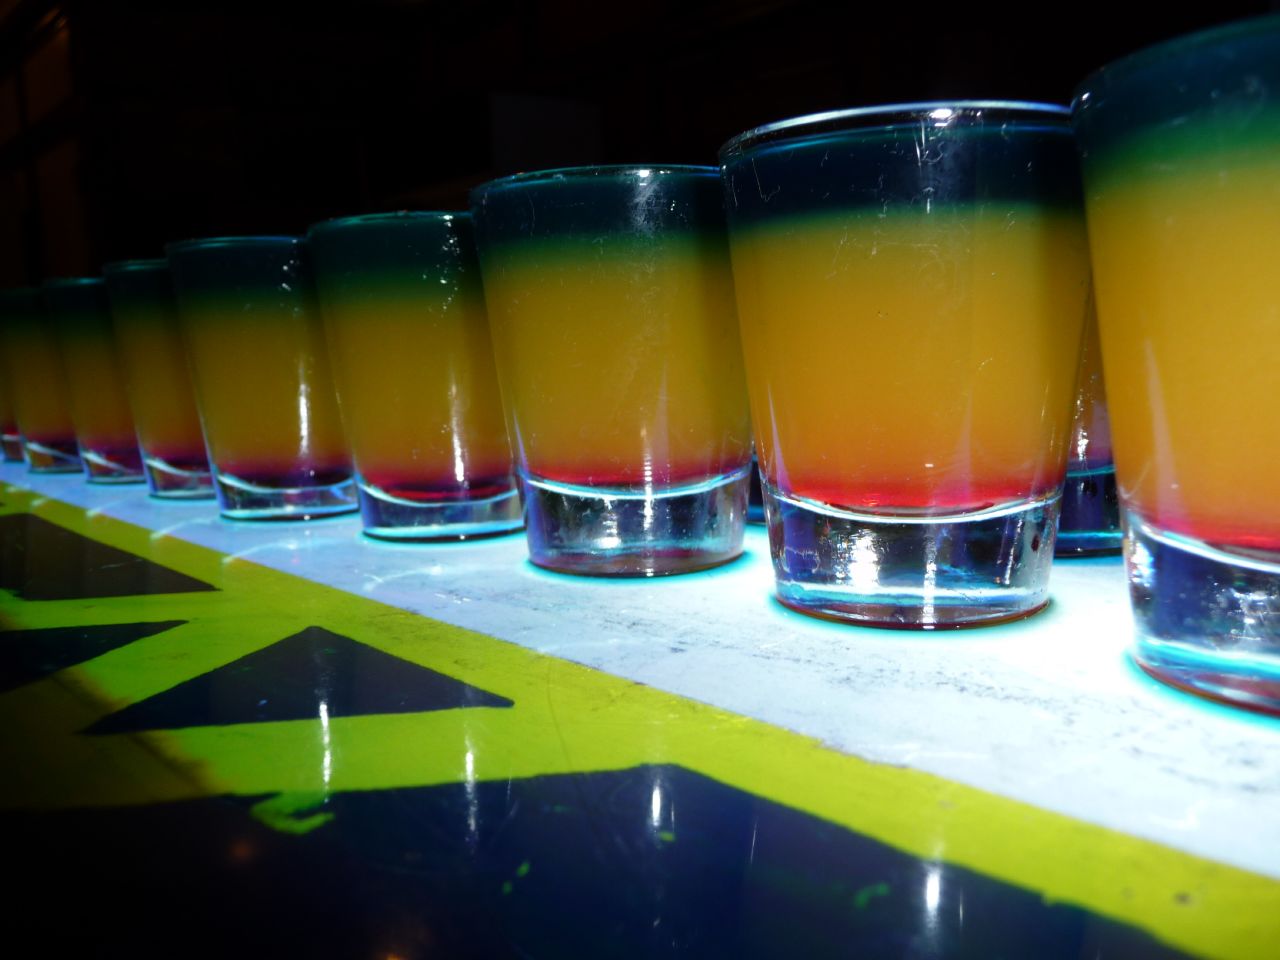 a row of glasses filled with colorful liquid